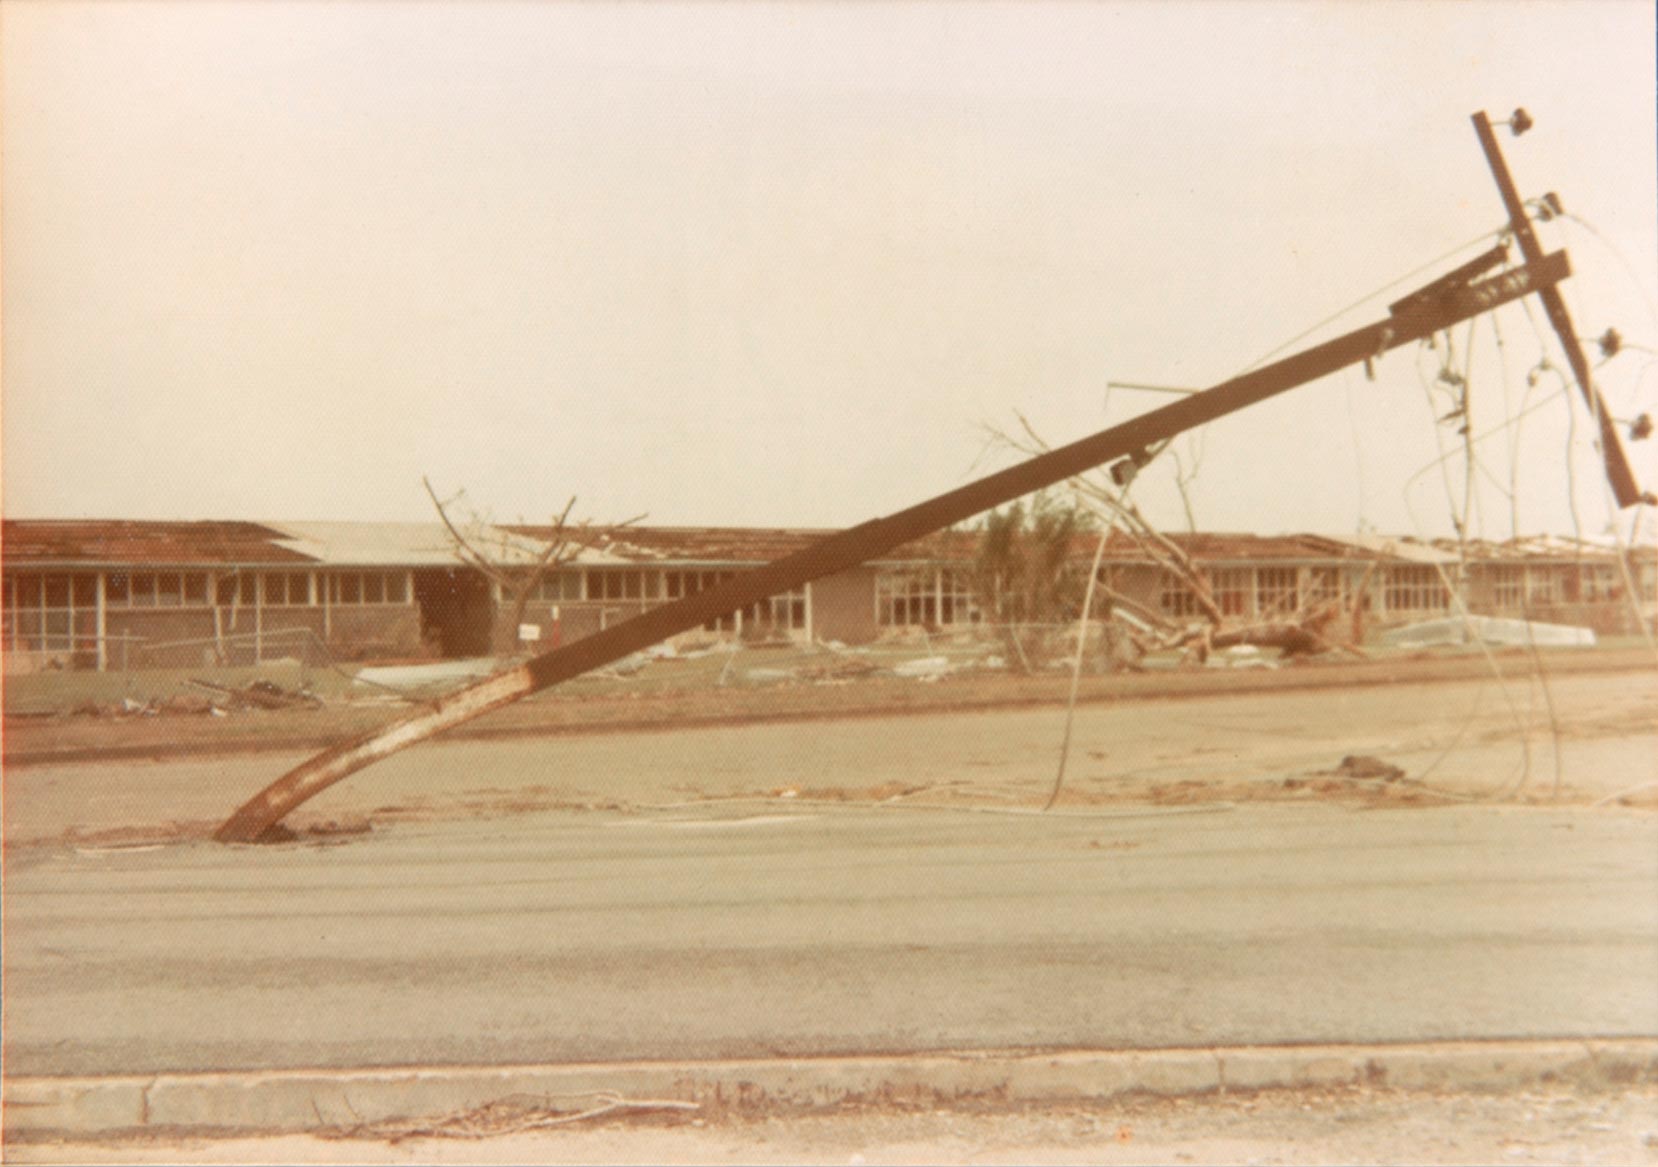 The devastation after Cyclone Tracy, 1974.